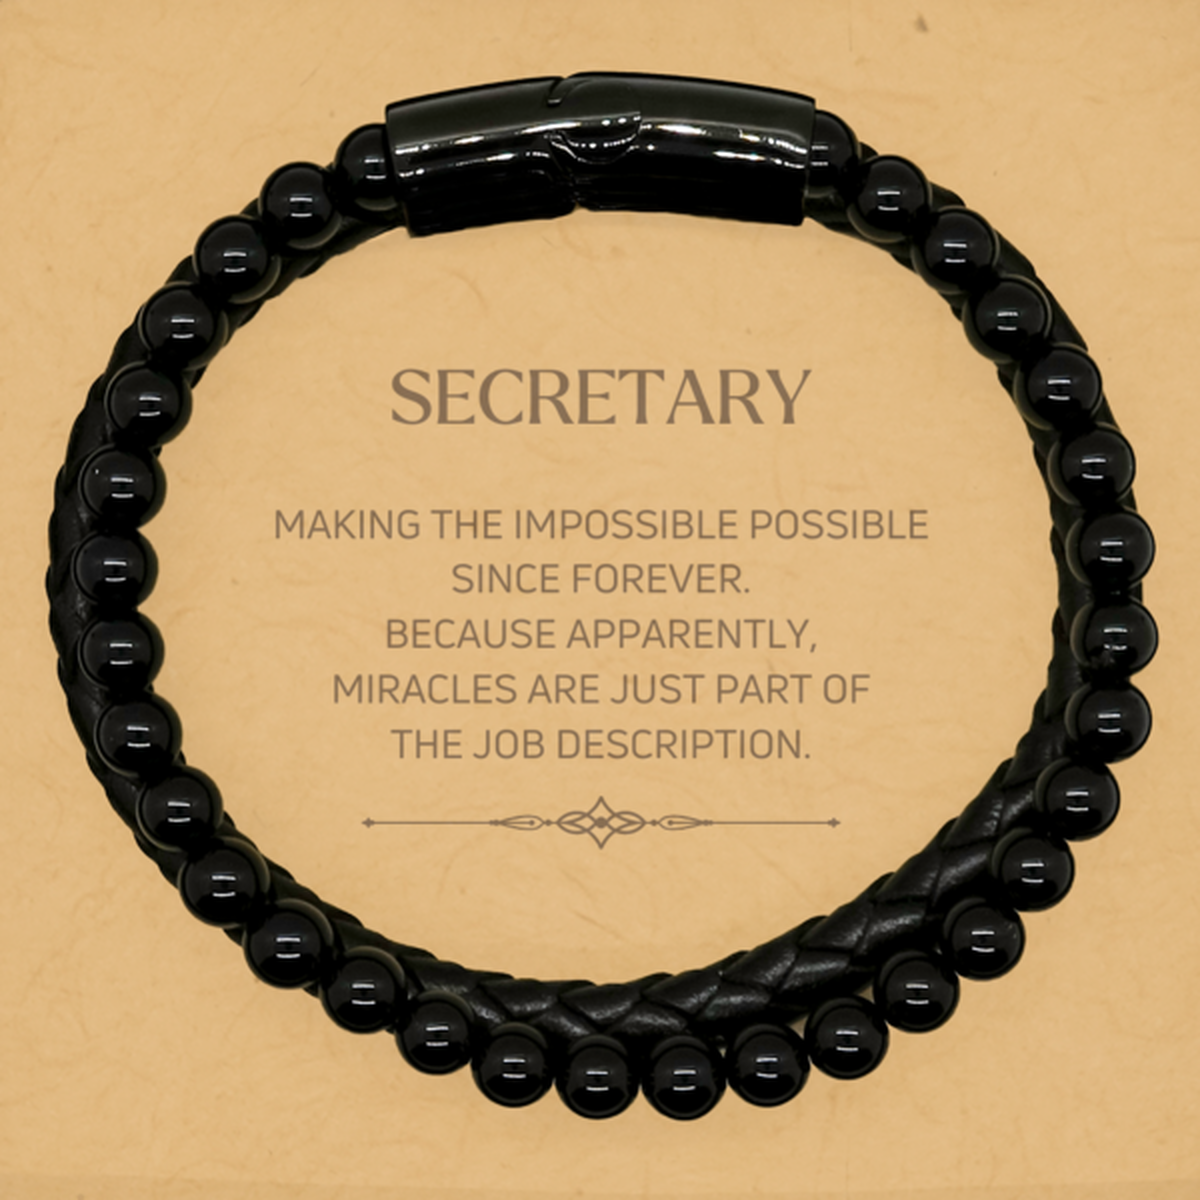 Funny Secretary Gifts, Miracles are just part of the job description, Inspirational Birthday Stone Leather Bracelets For Secretary, Men, Women, Coworkers, Friends, Boss